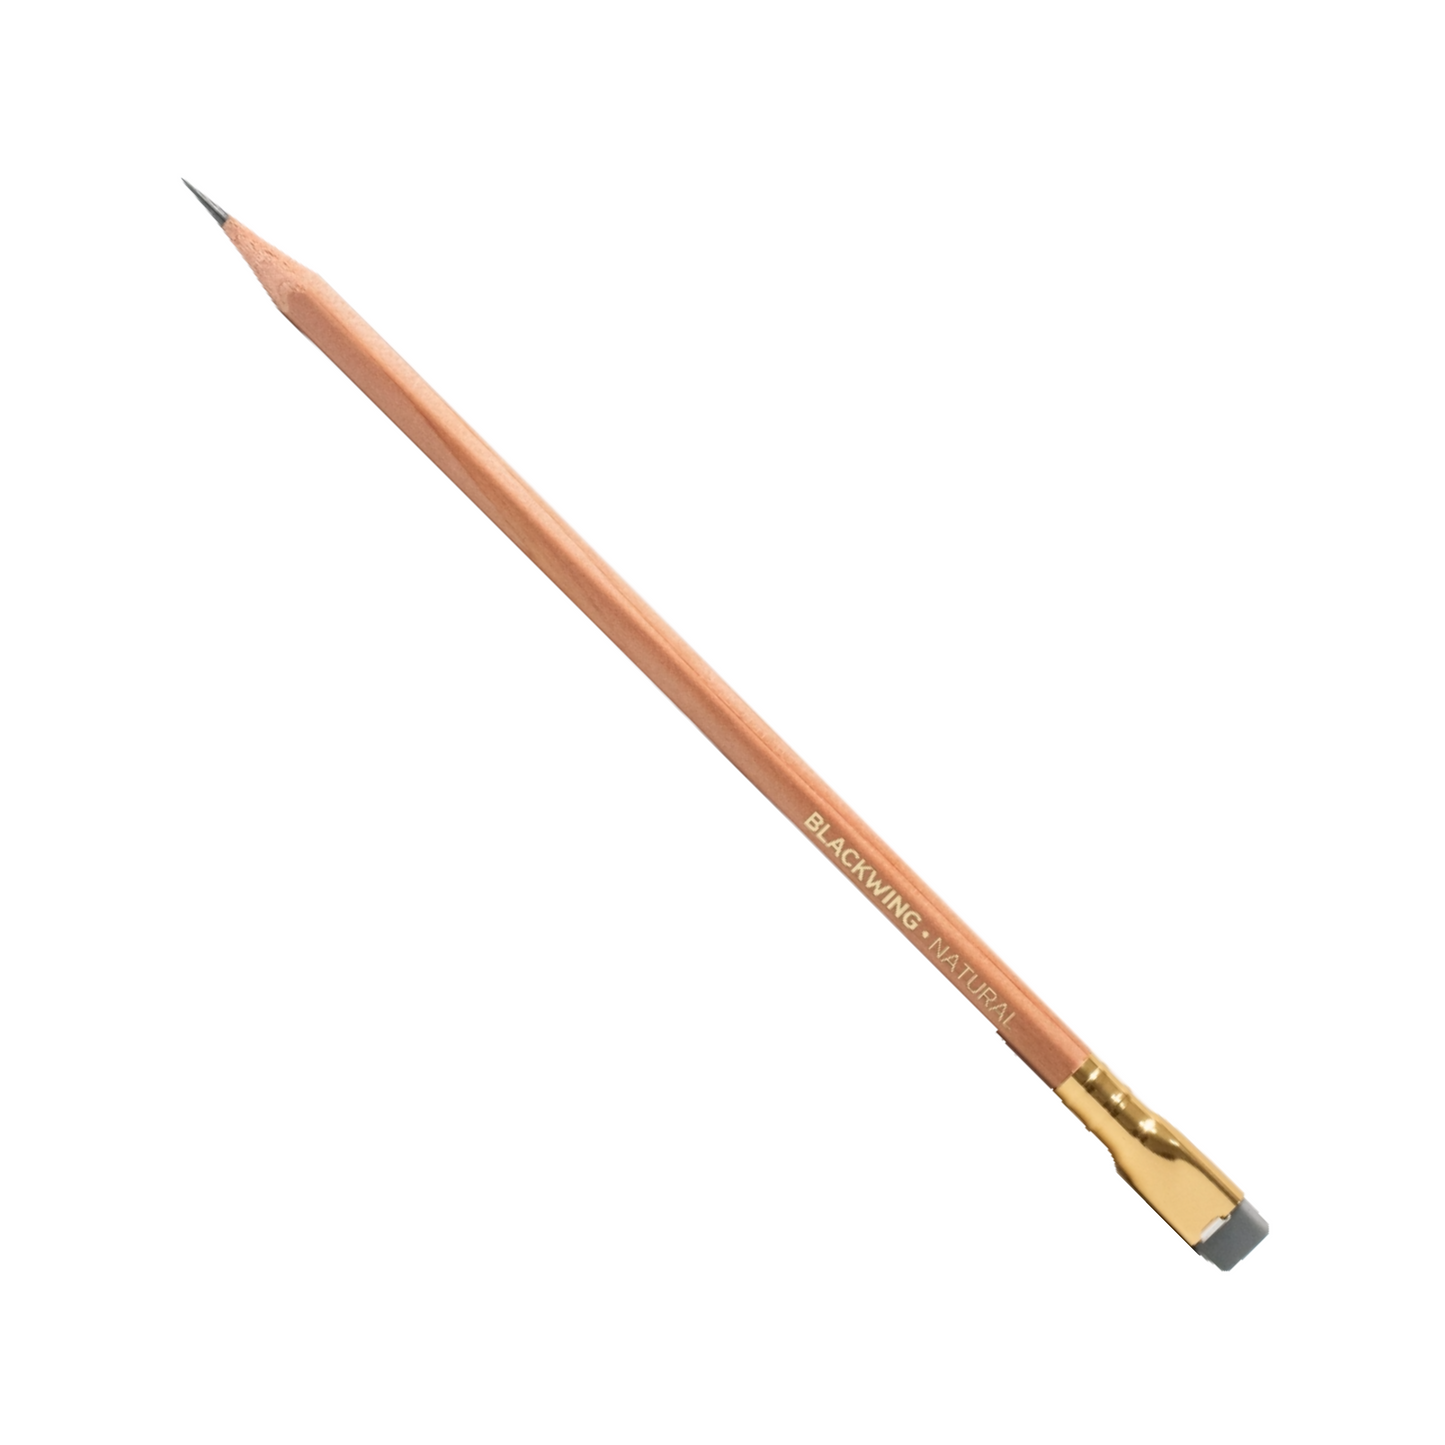 Blackwing Natural Pencil Set by Blackwing